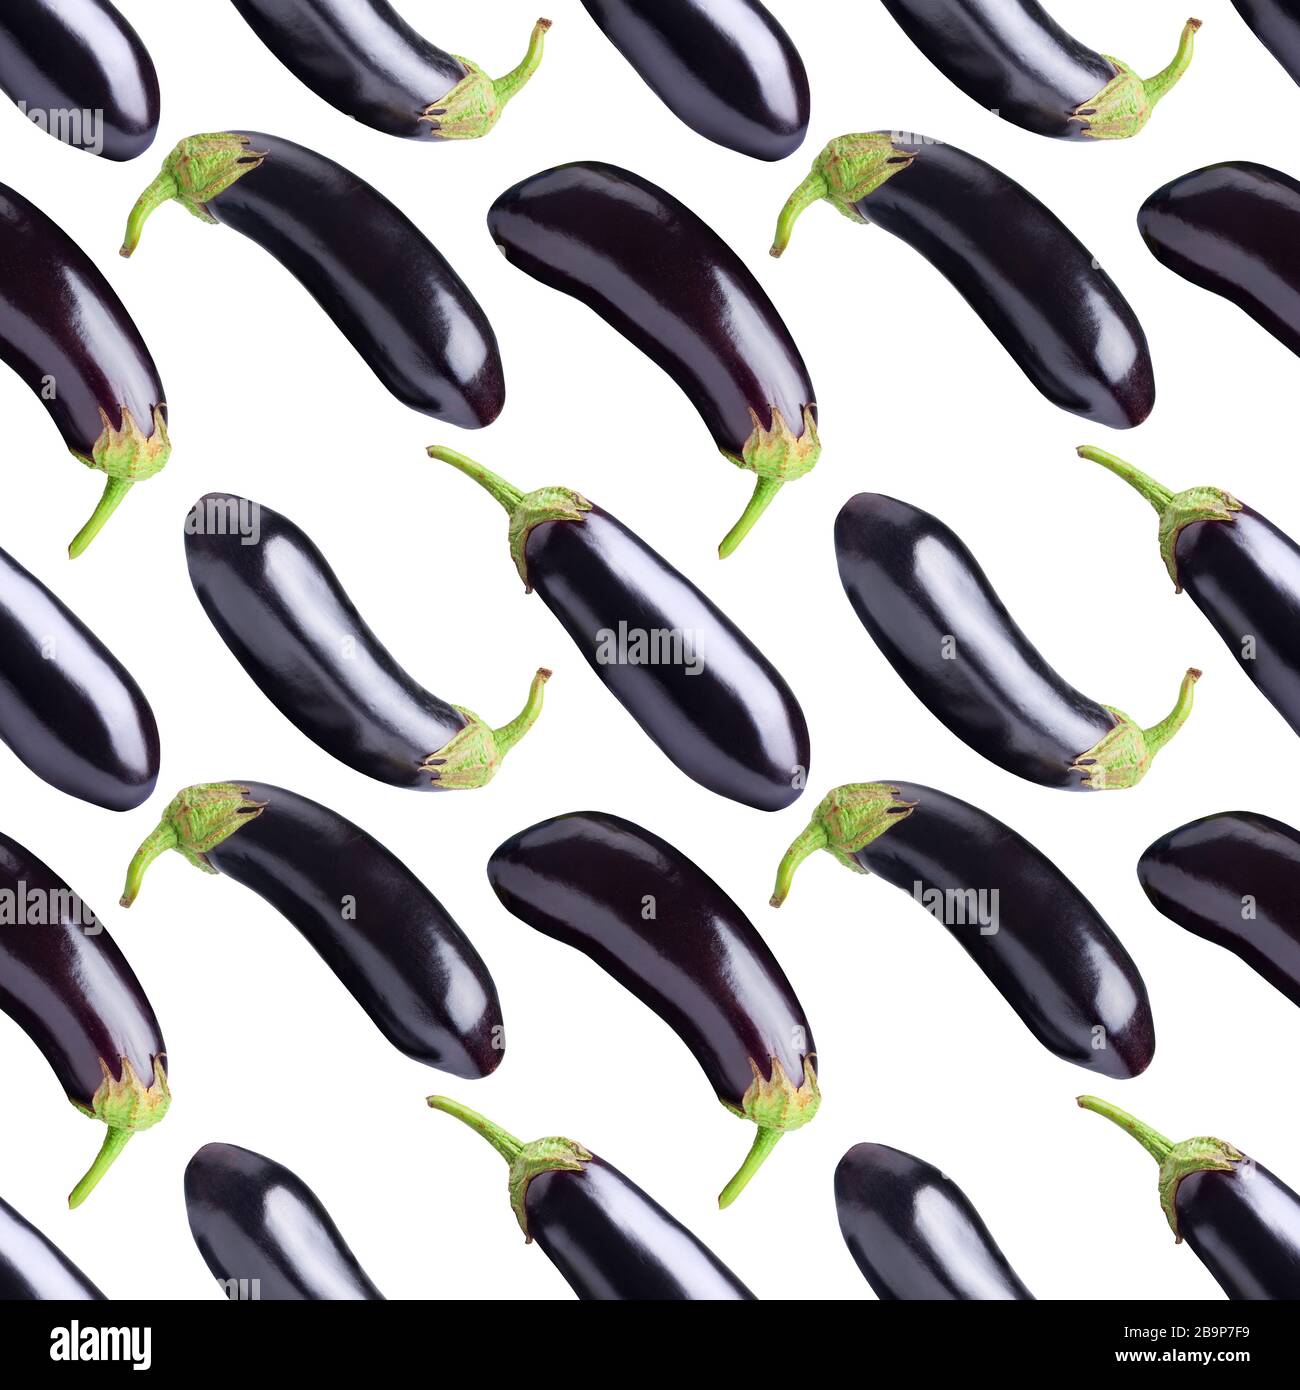 500 Eggplant Pictures HD  Download Free Images on Unsplash